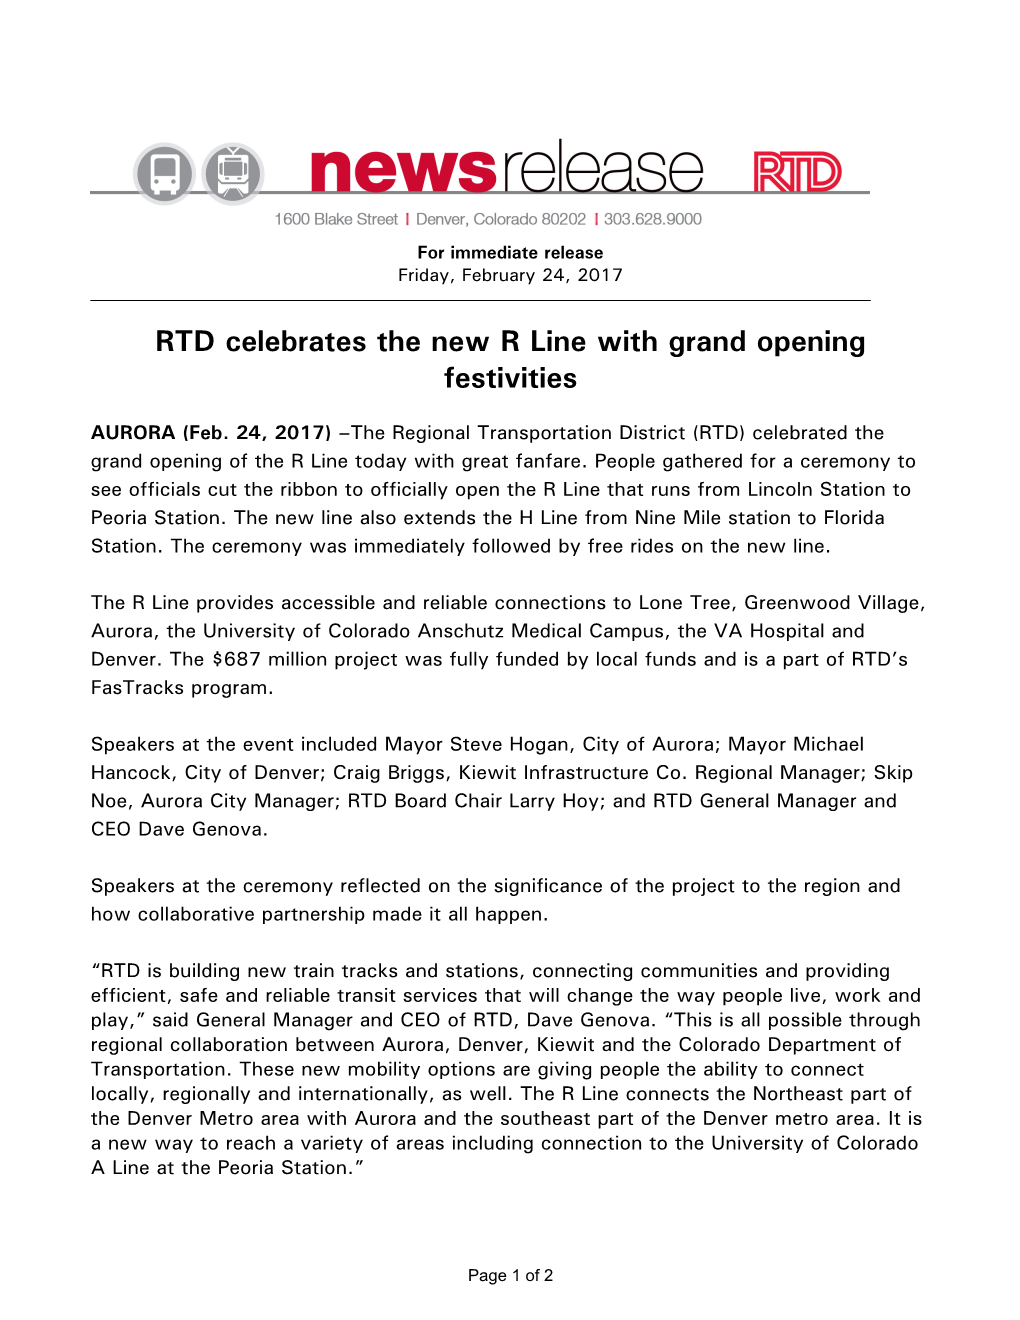 RTD Celebrates the New R Line with Grand Opening Festivities